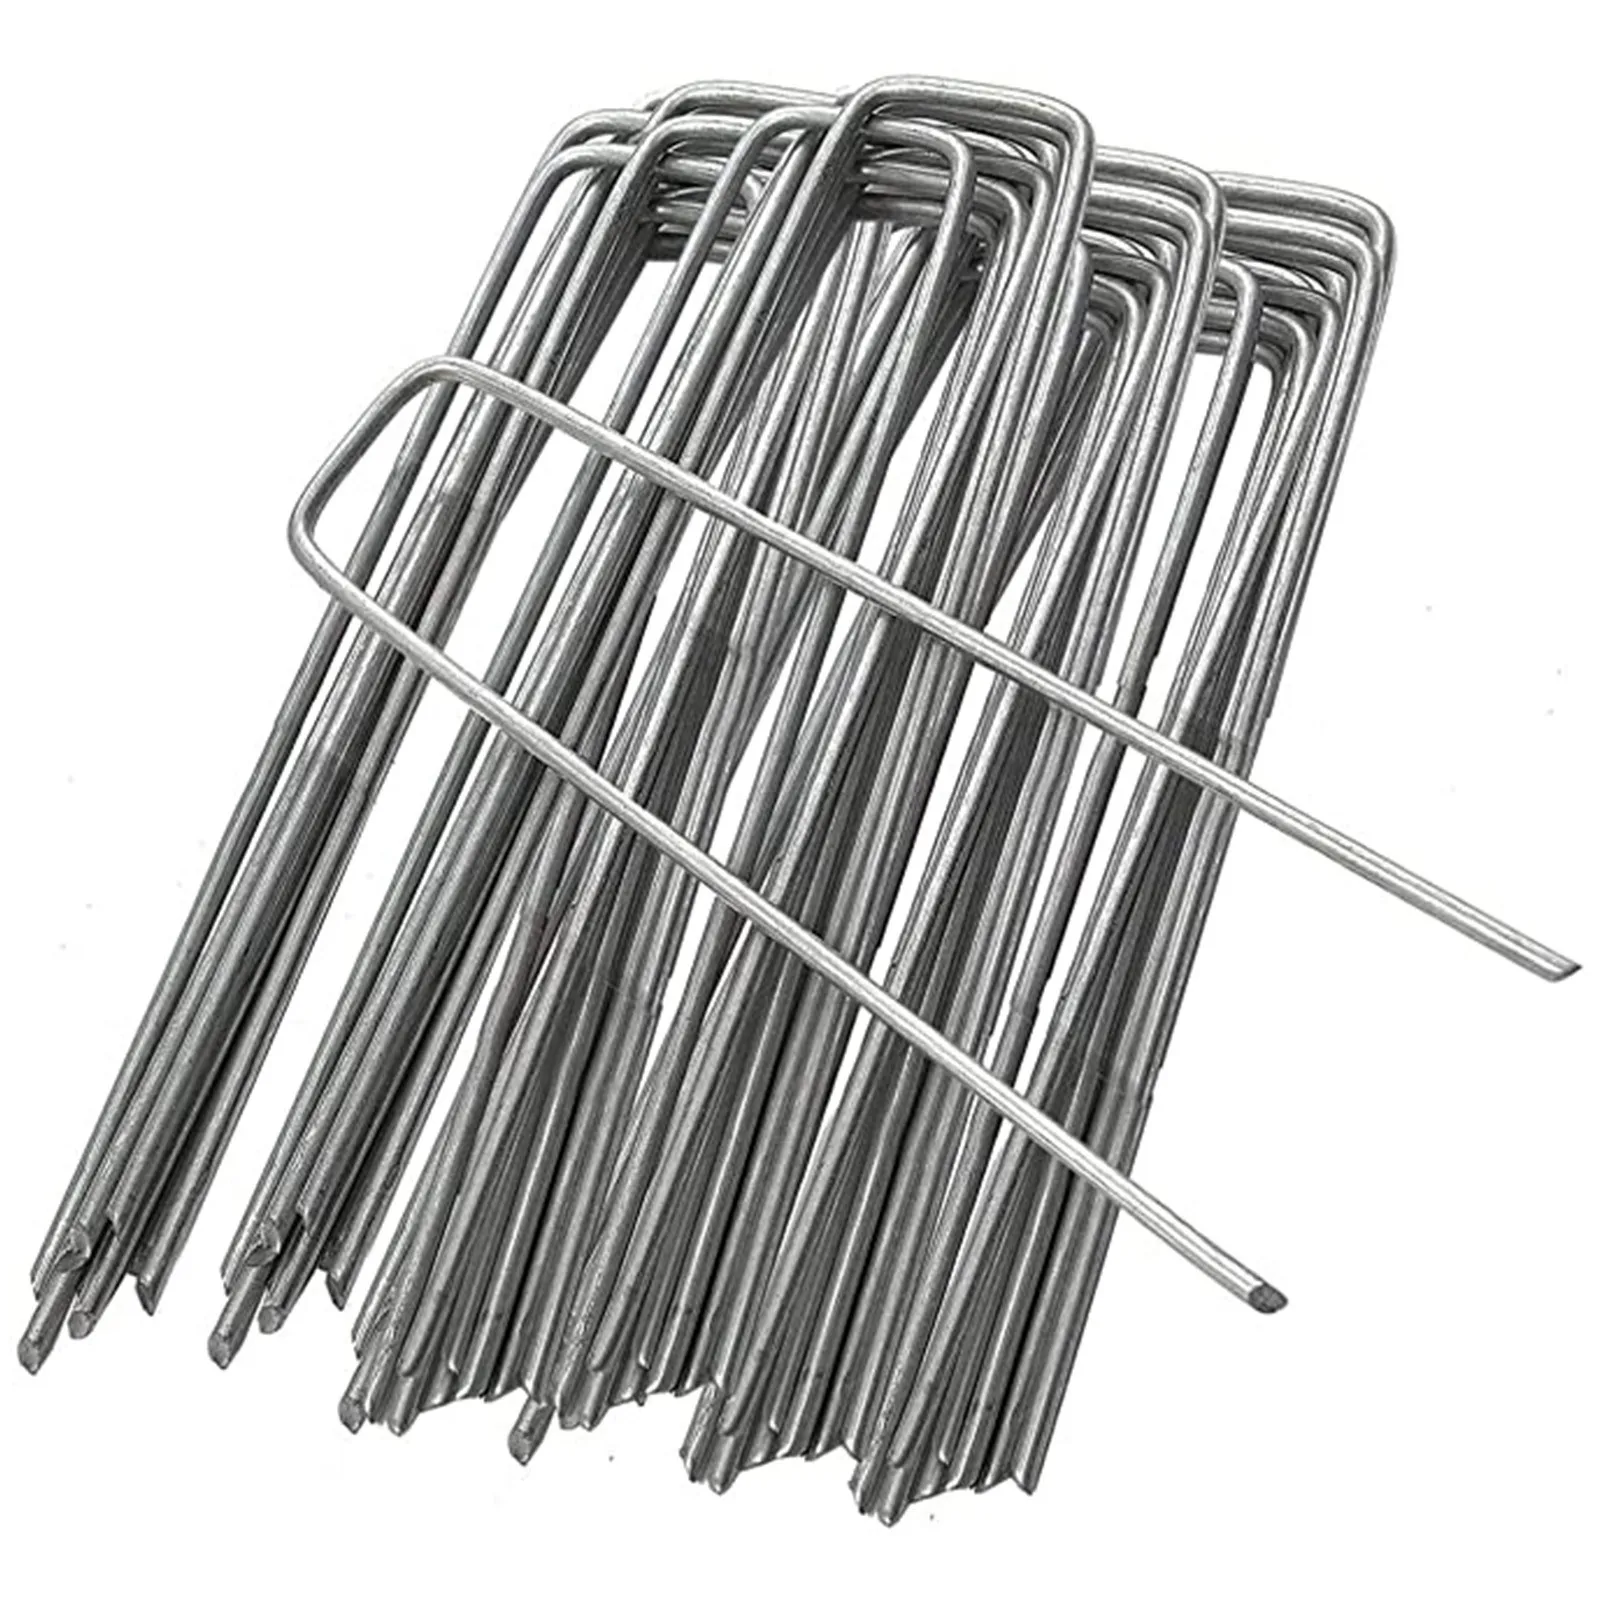 AAGUT OuYi Garden Staples Galvanized Landscape Sod Stakes Silver 50 Pack 6 Inch 11 Gauge Rust Resistant Steel Lawn U Pins Pegs-Weed Barrier Fabric GardenStaple 